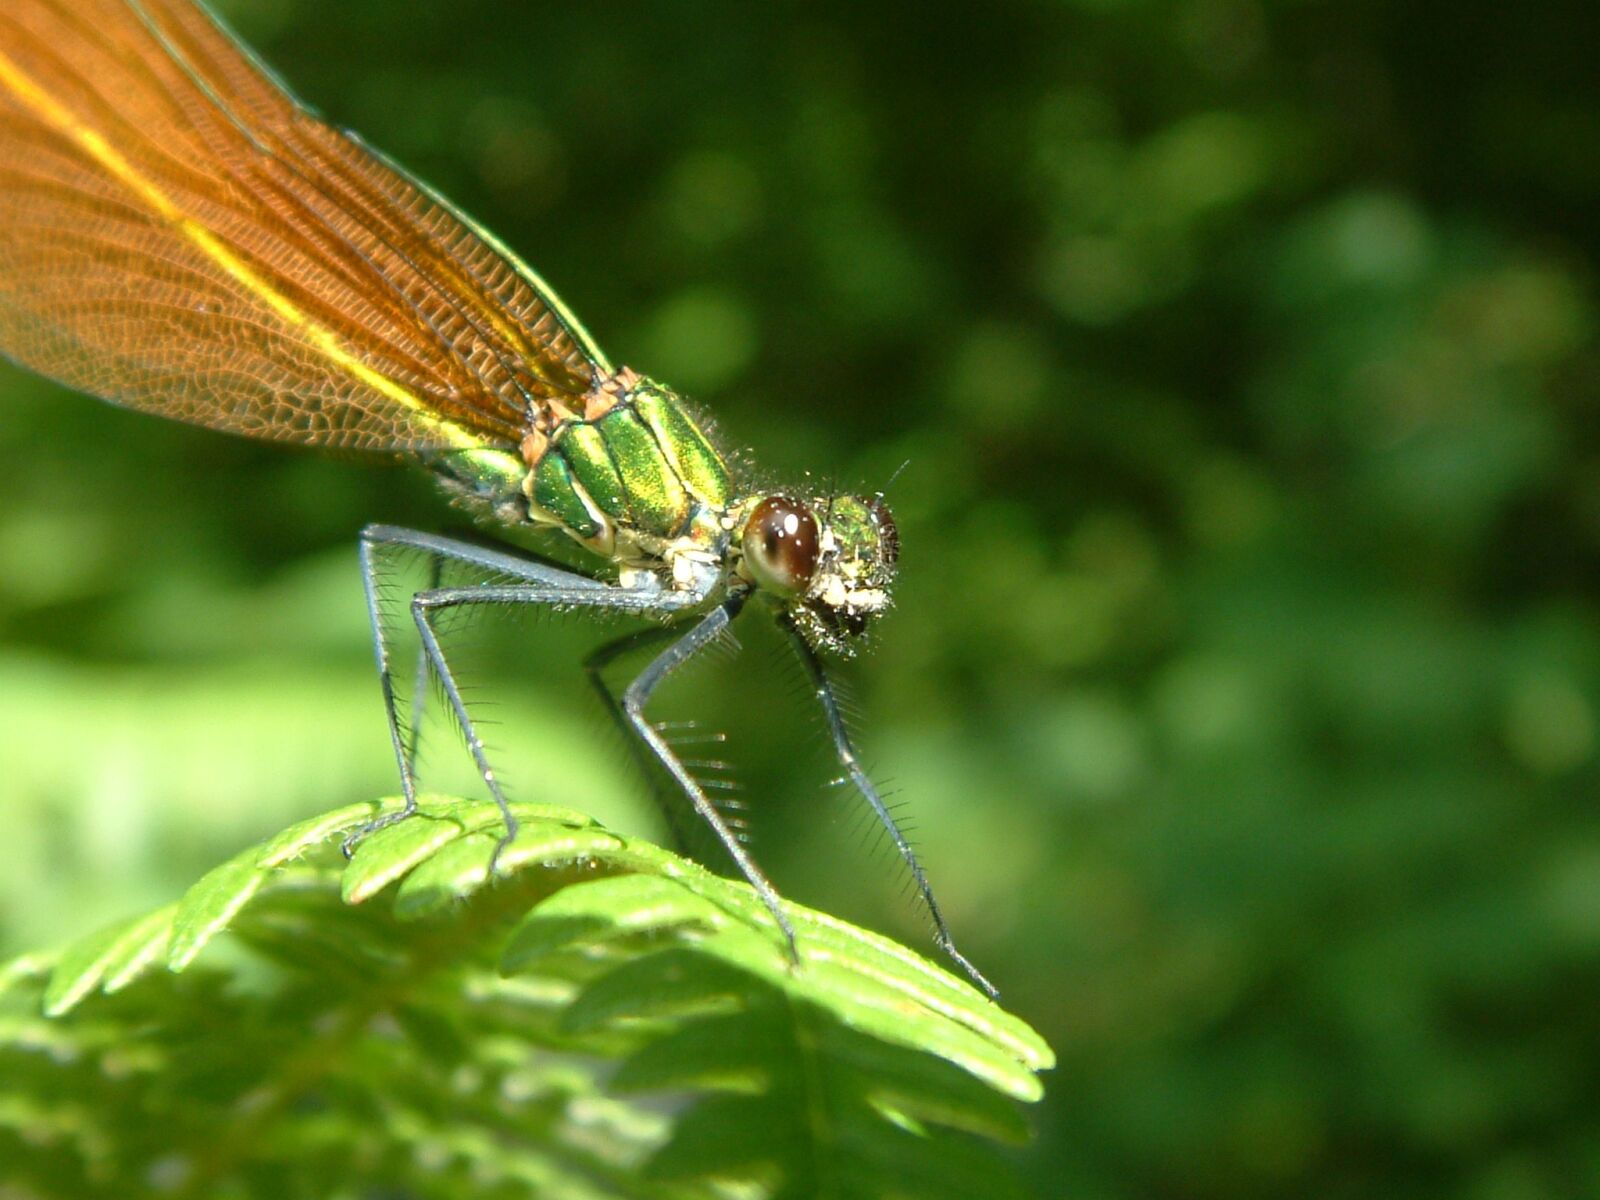 Fujifilm FinePix S602 ZOOM sample photo. Dragonfly, smile, insect photography